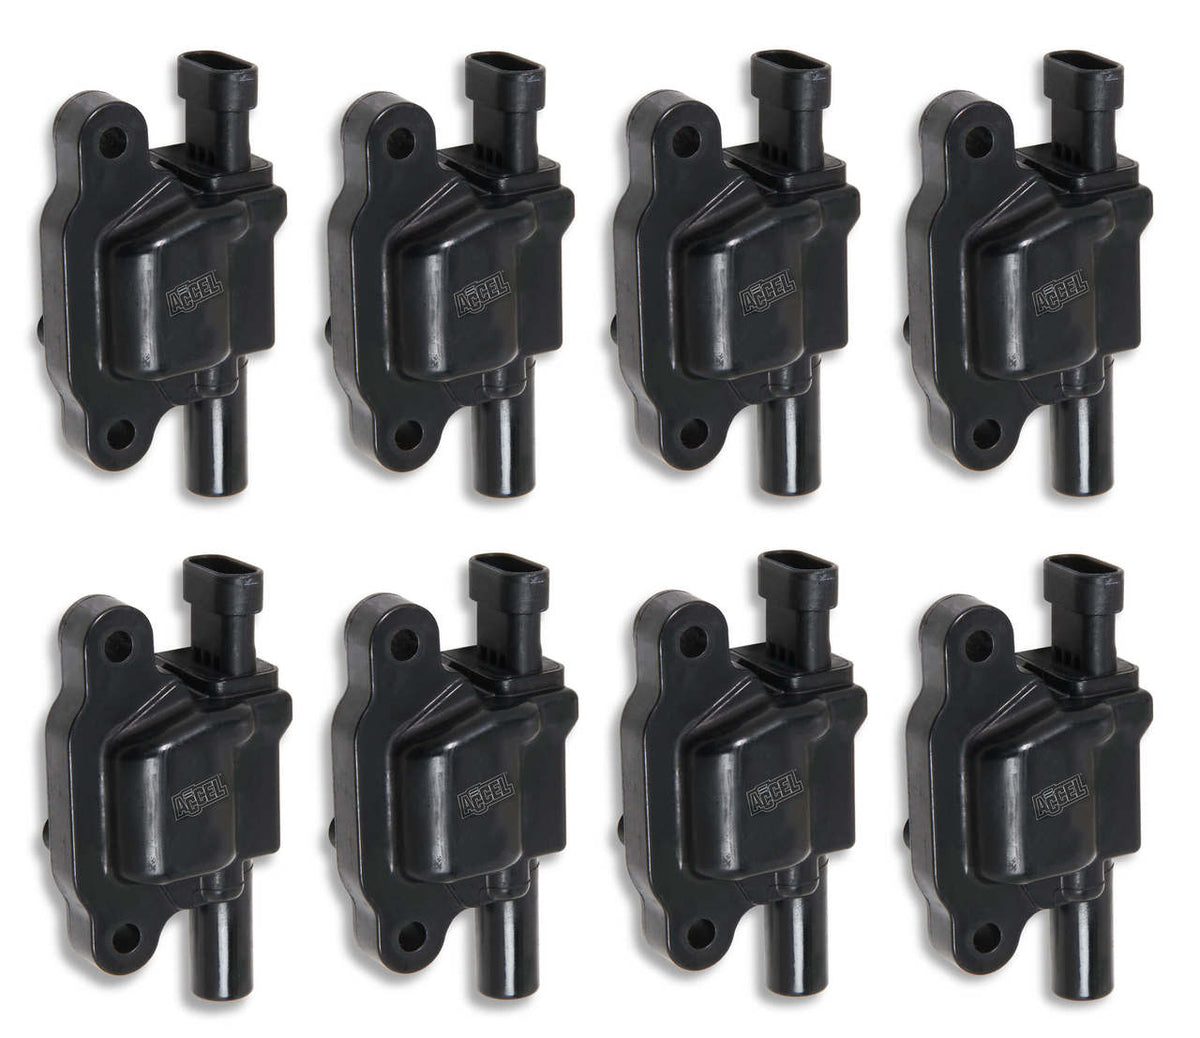 GM LS2/LS3/LS7 ENGINES SUPERCOIL IGNITION COIL, BLACK, SET OF 8, ACCEL